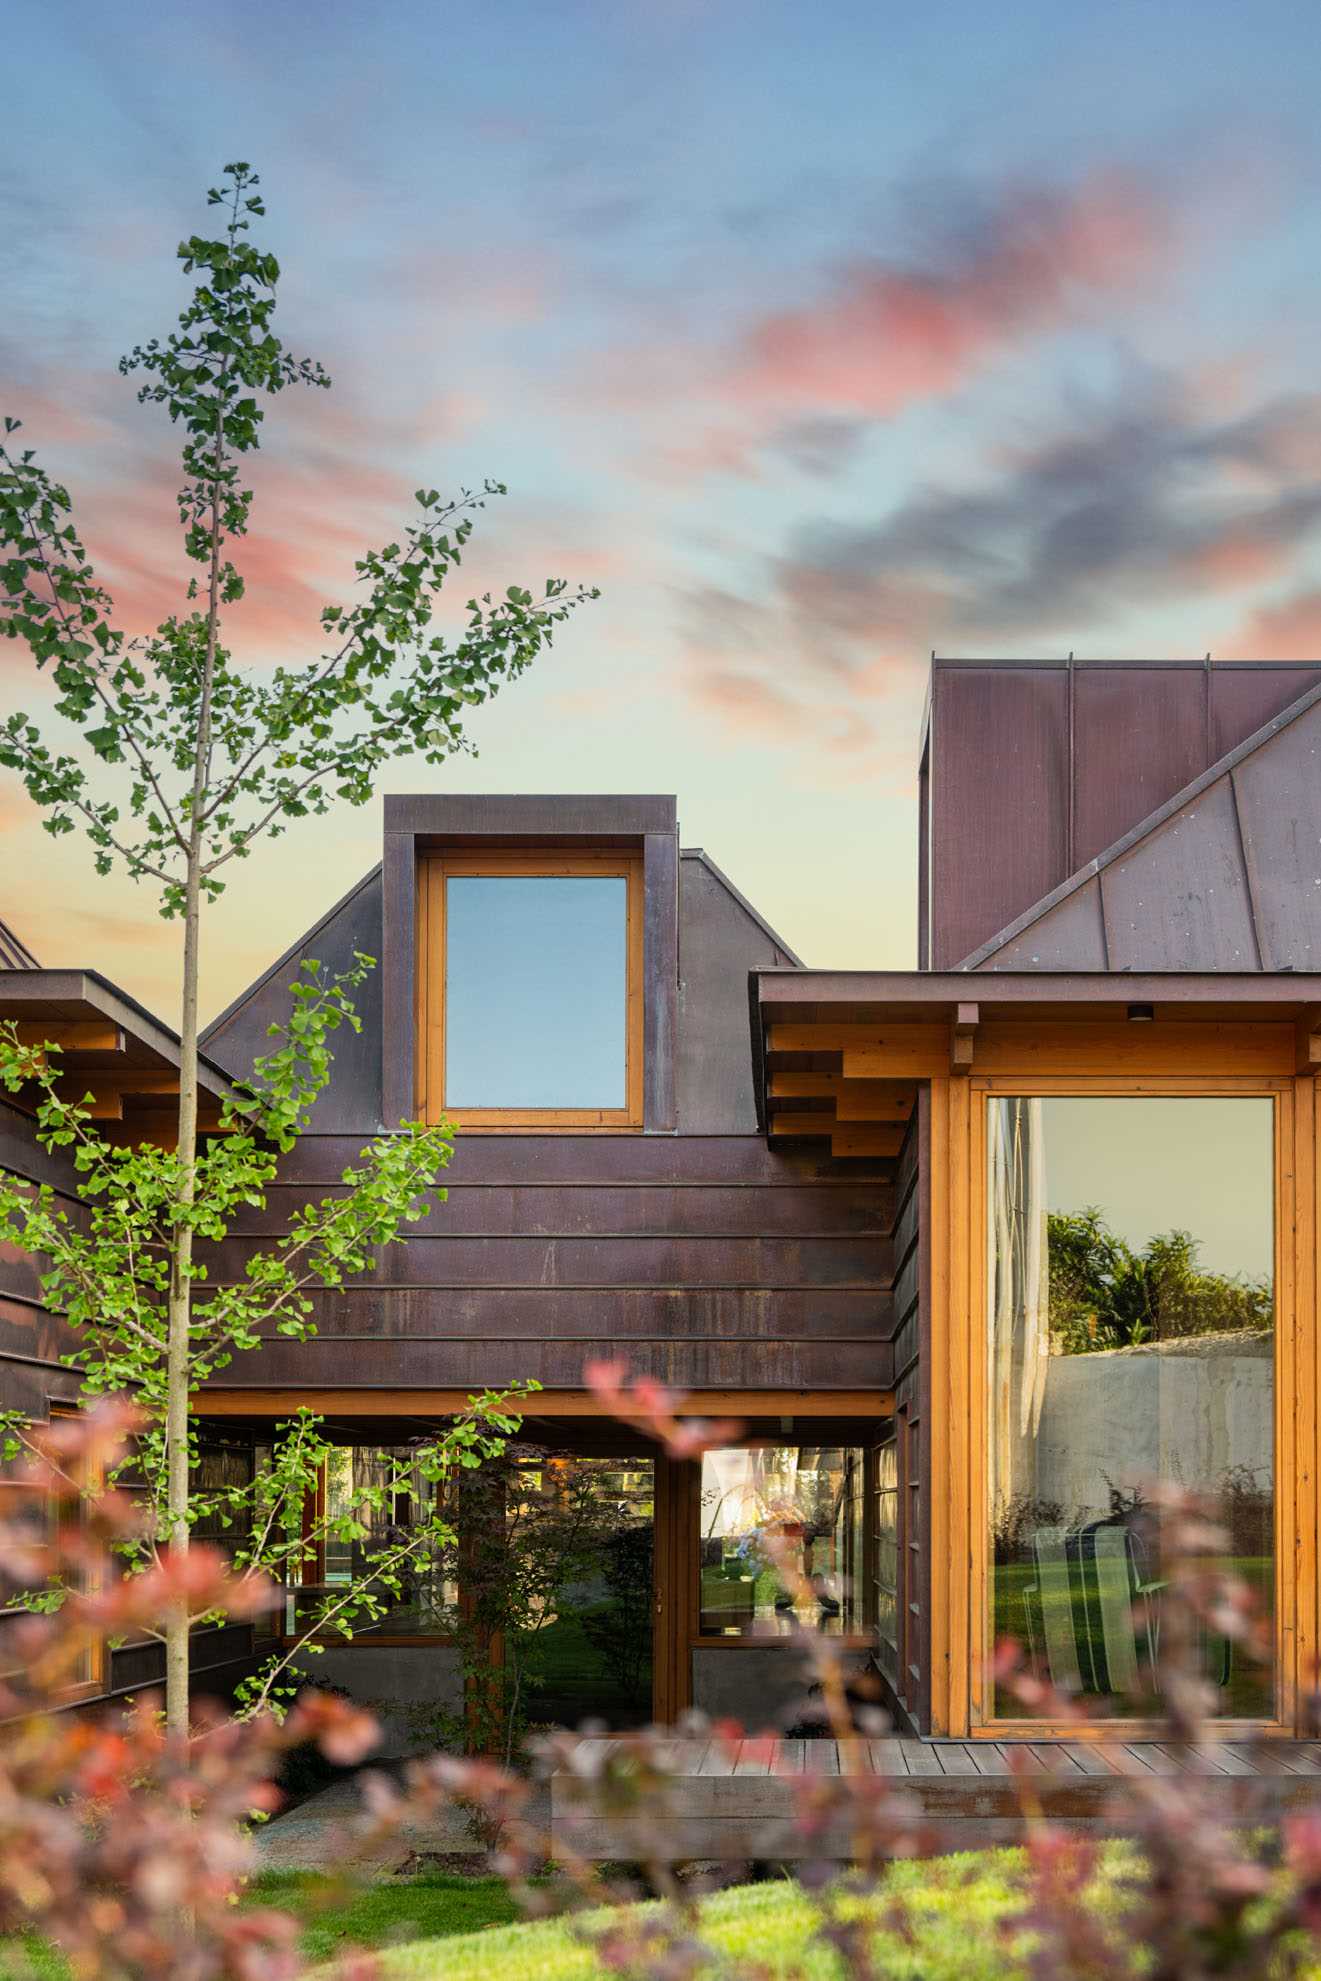 A modern house with copper-clad roof and copper siding, and wood framing.